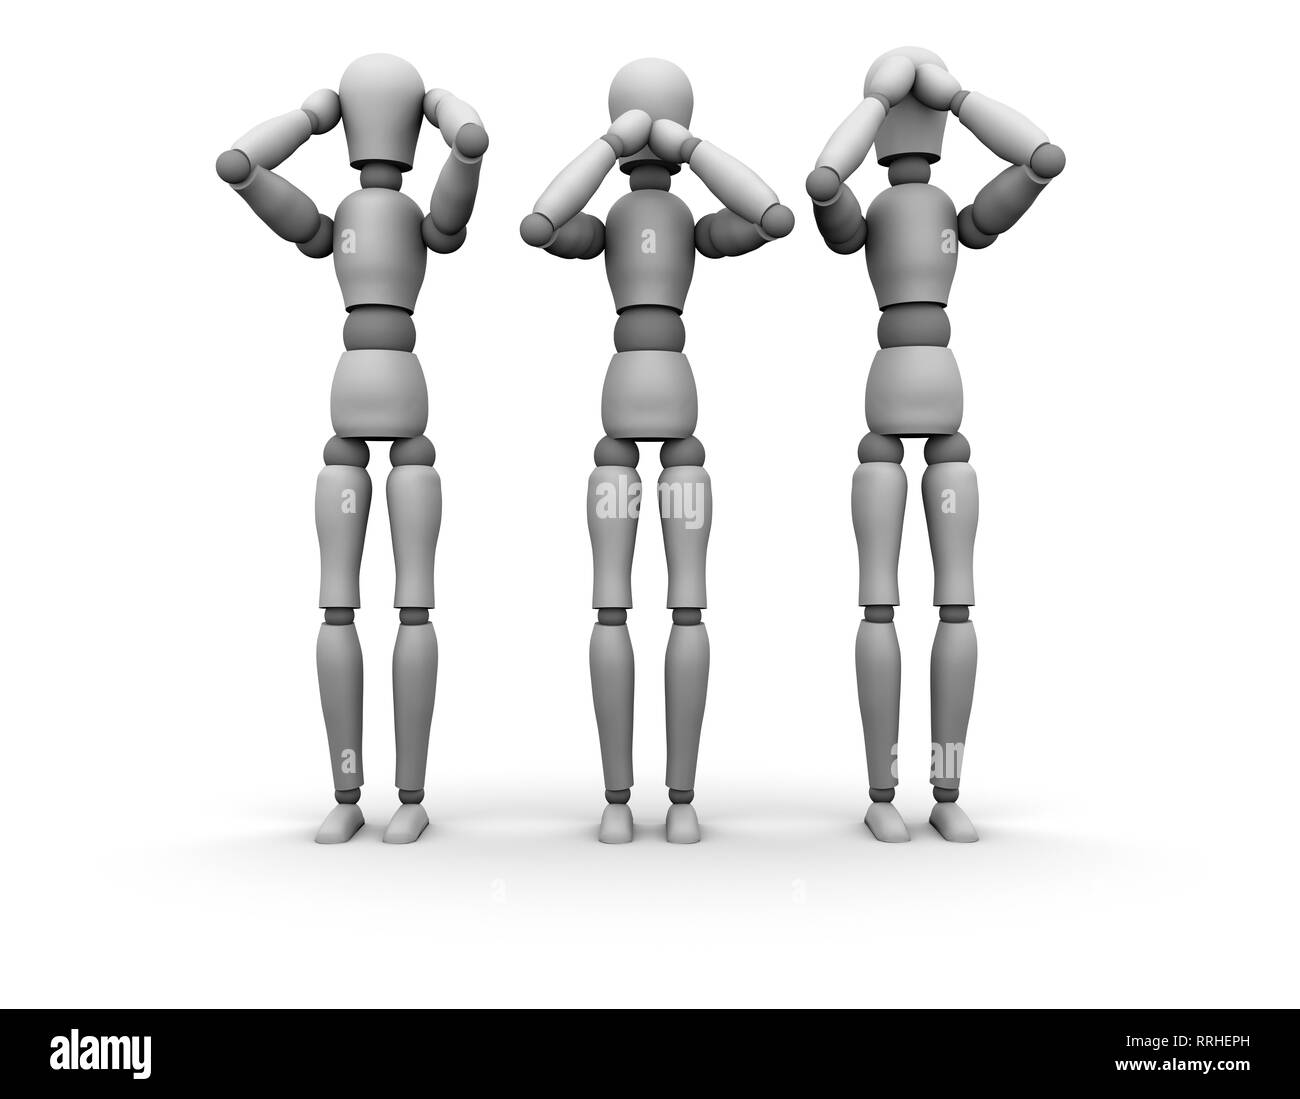 Three high resolution 3D mannequins doing the famous 'hear no evil, speak no evil, see no evil' poses. Isolated on white background. Stock Photo